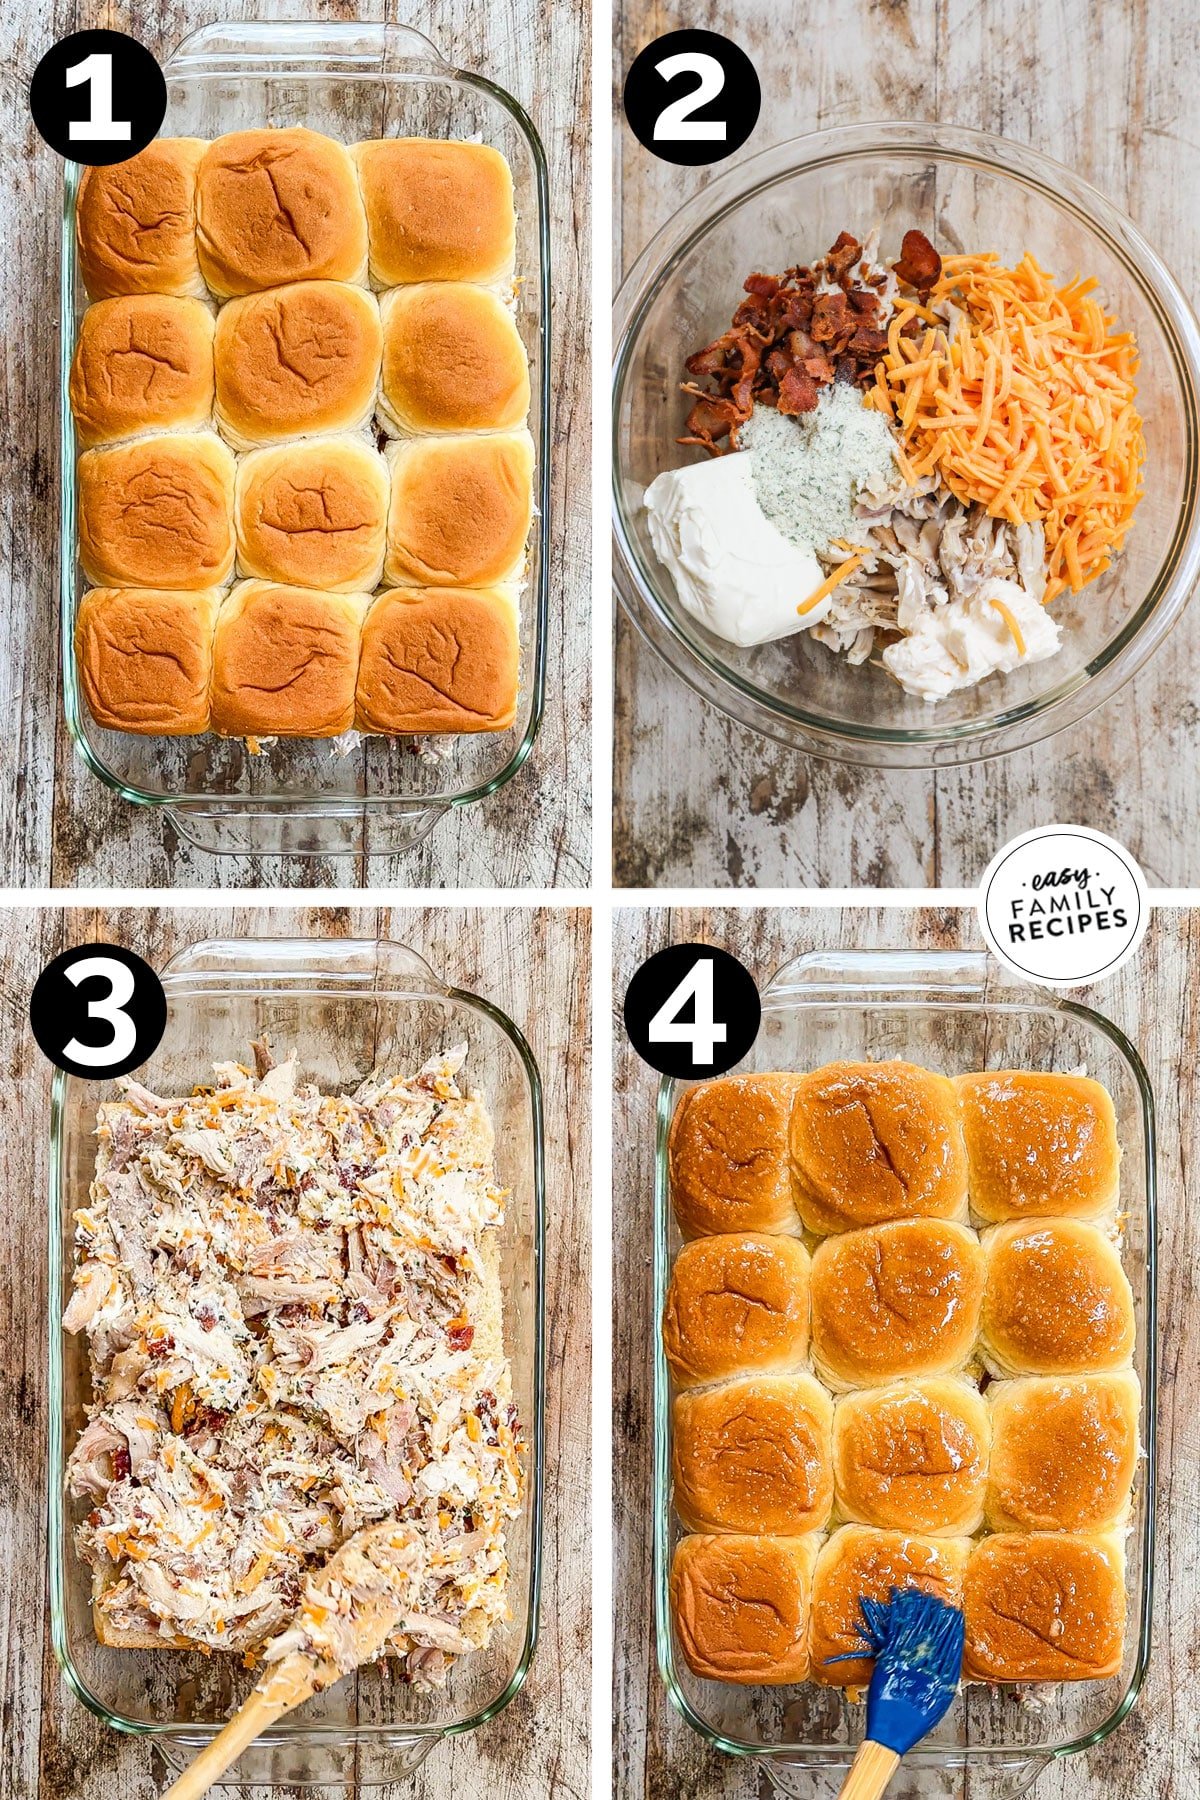 How to make chicken bacon ranch sliders: 1) add rolls to baking dish, 2) stir together filling ingredients, 3) spread filling onto rolls, 4) brush tops of rolls with garlic butter